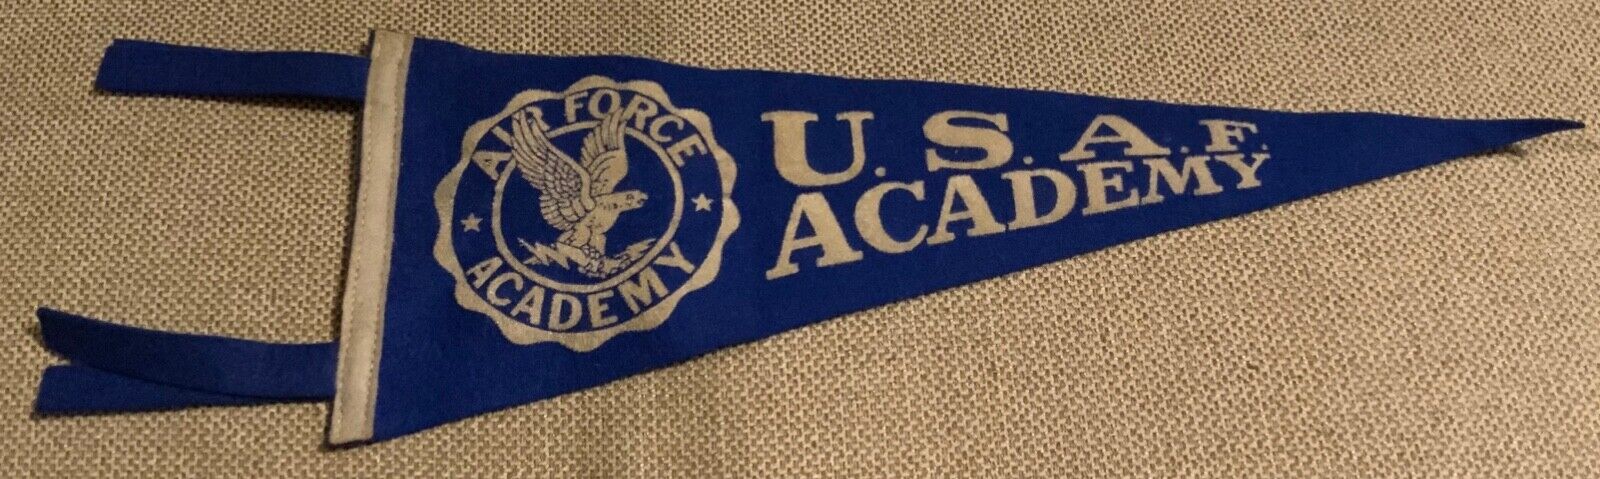 Air Force U.S.A.F. Academy Chicago Pennant Company 70% Wool 30% Rayon Vintage